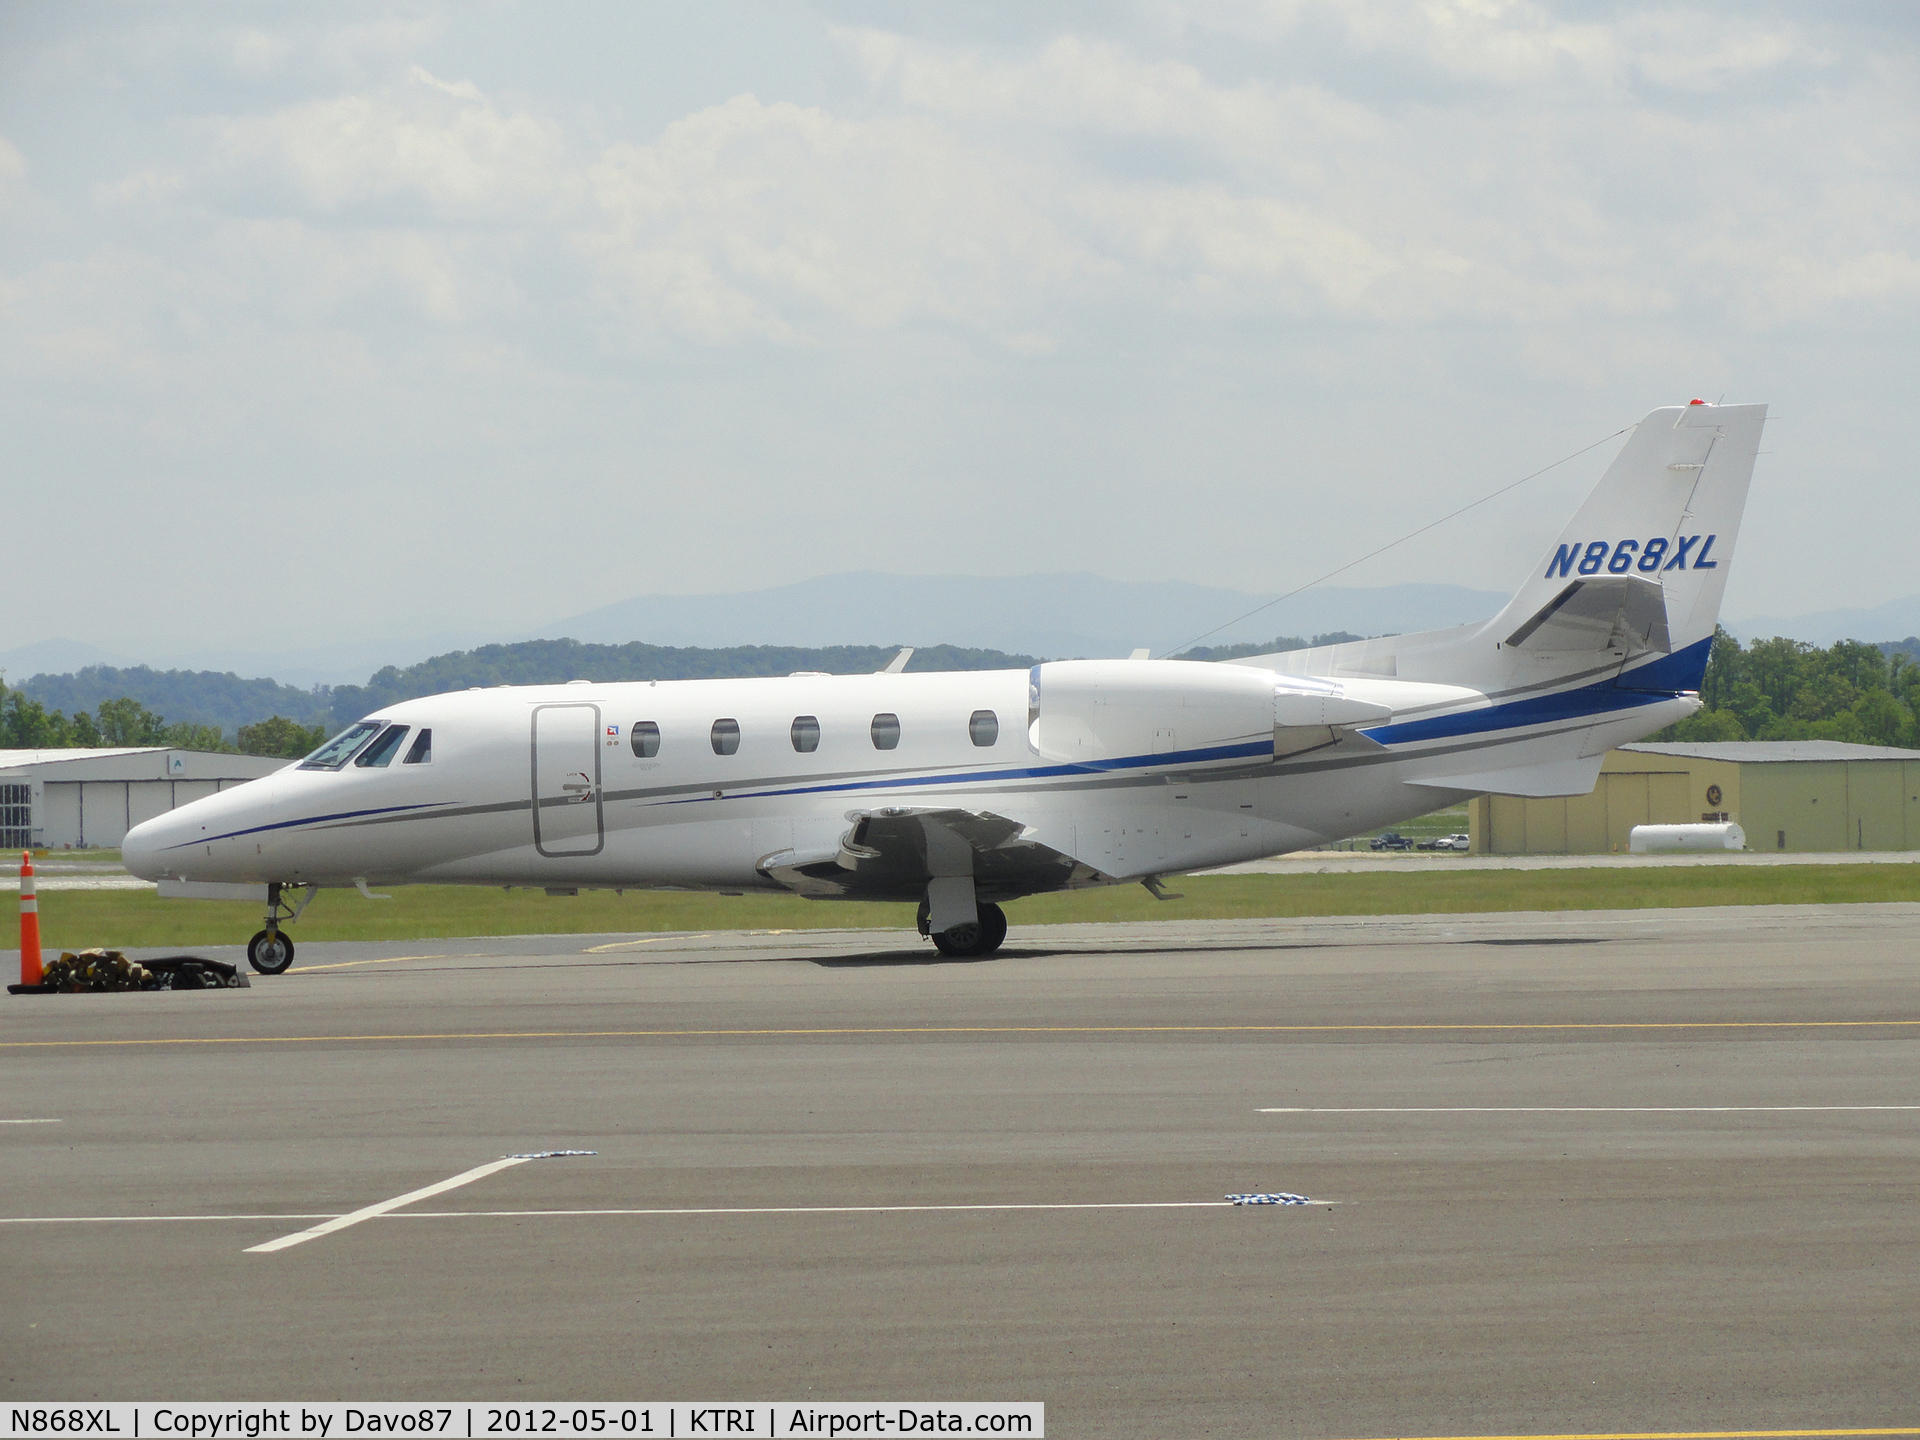 N868XL, 2005 Cessna 560XL C/N 560-5603, Parked at Tri-Cities Airport on May 1, 2012.